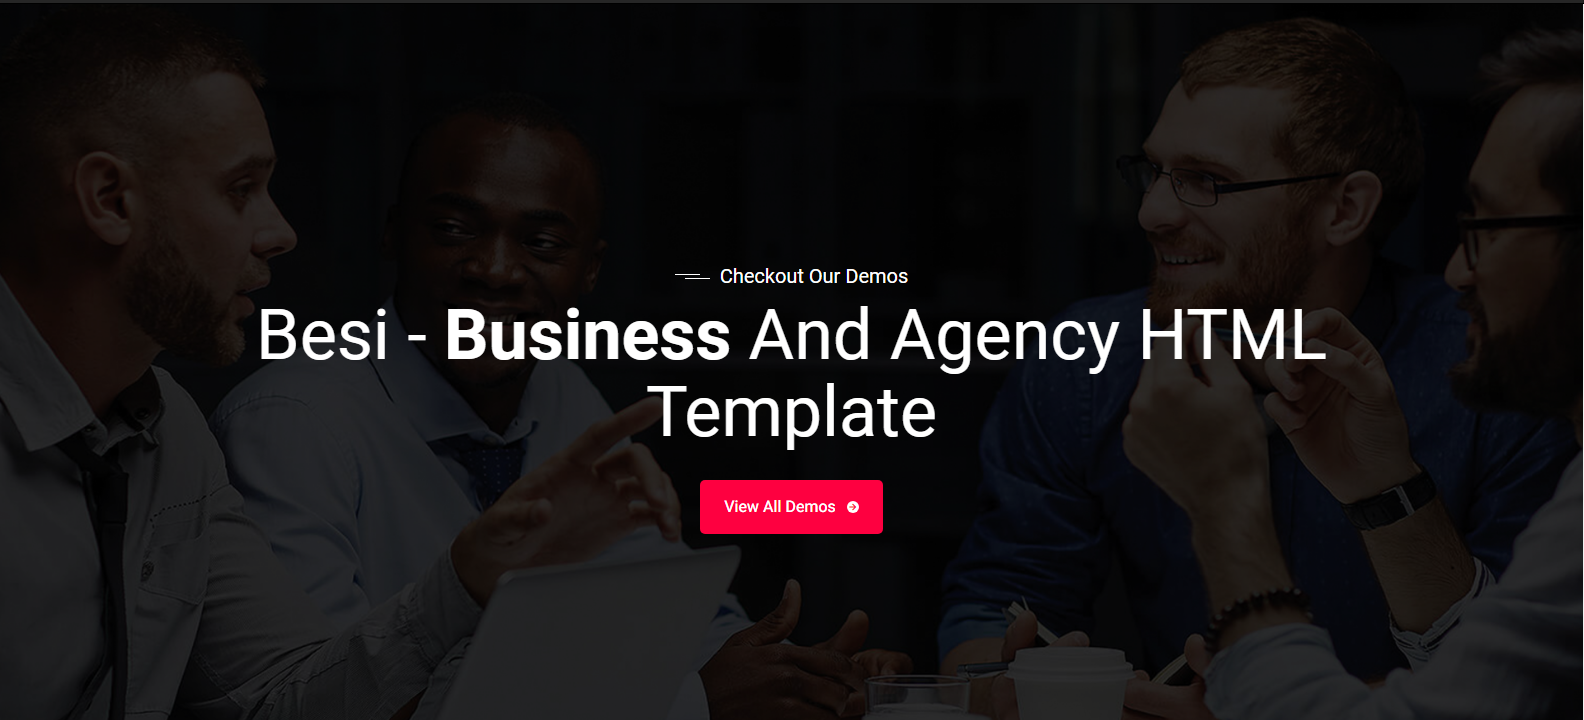 Besi v1.1 - Business and Agency HTML Template